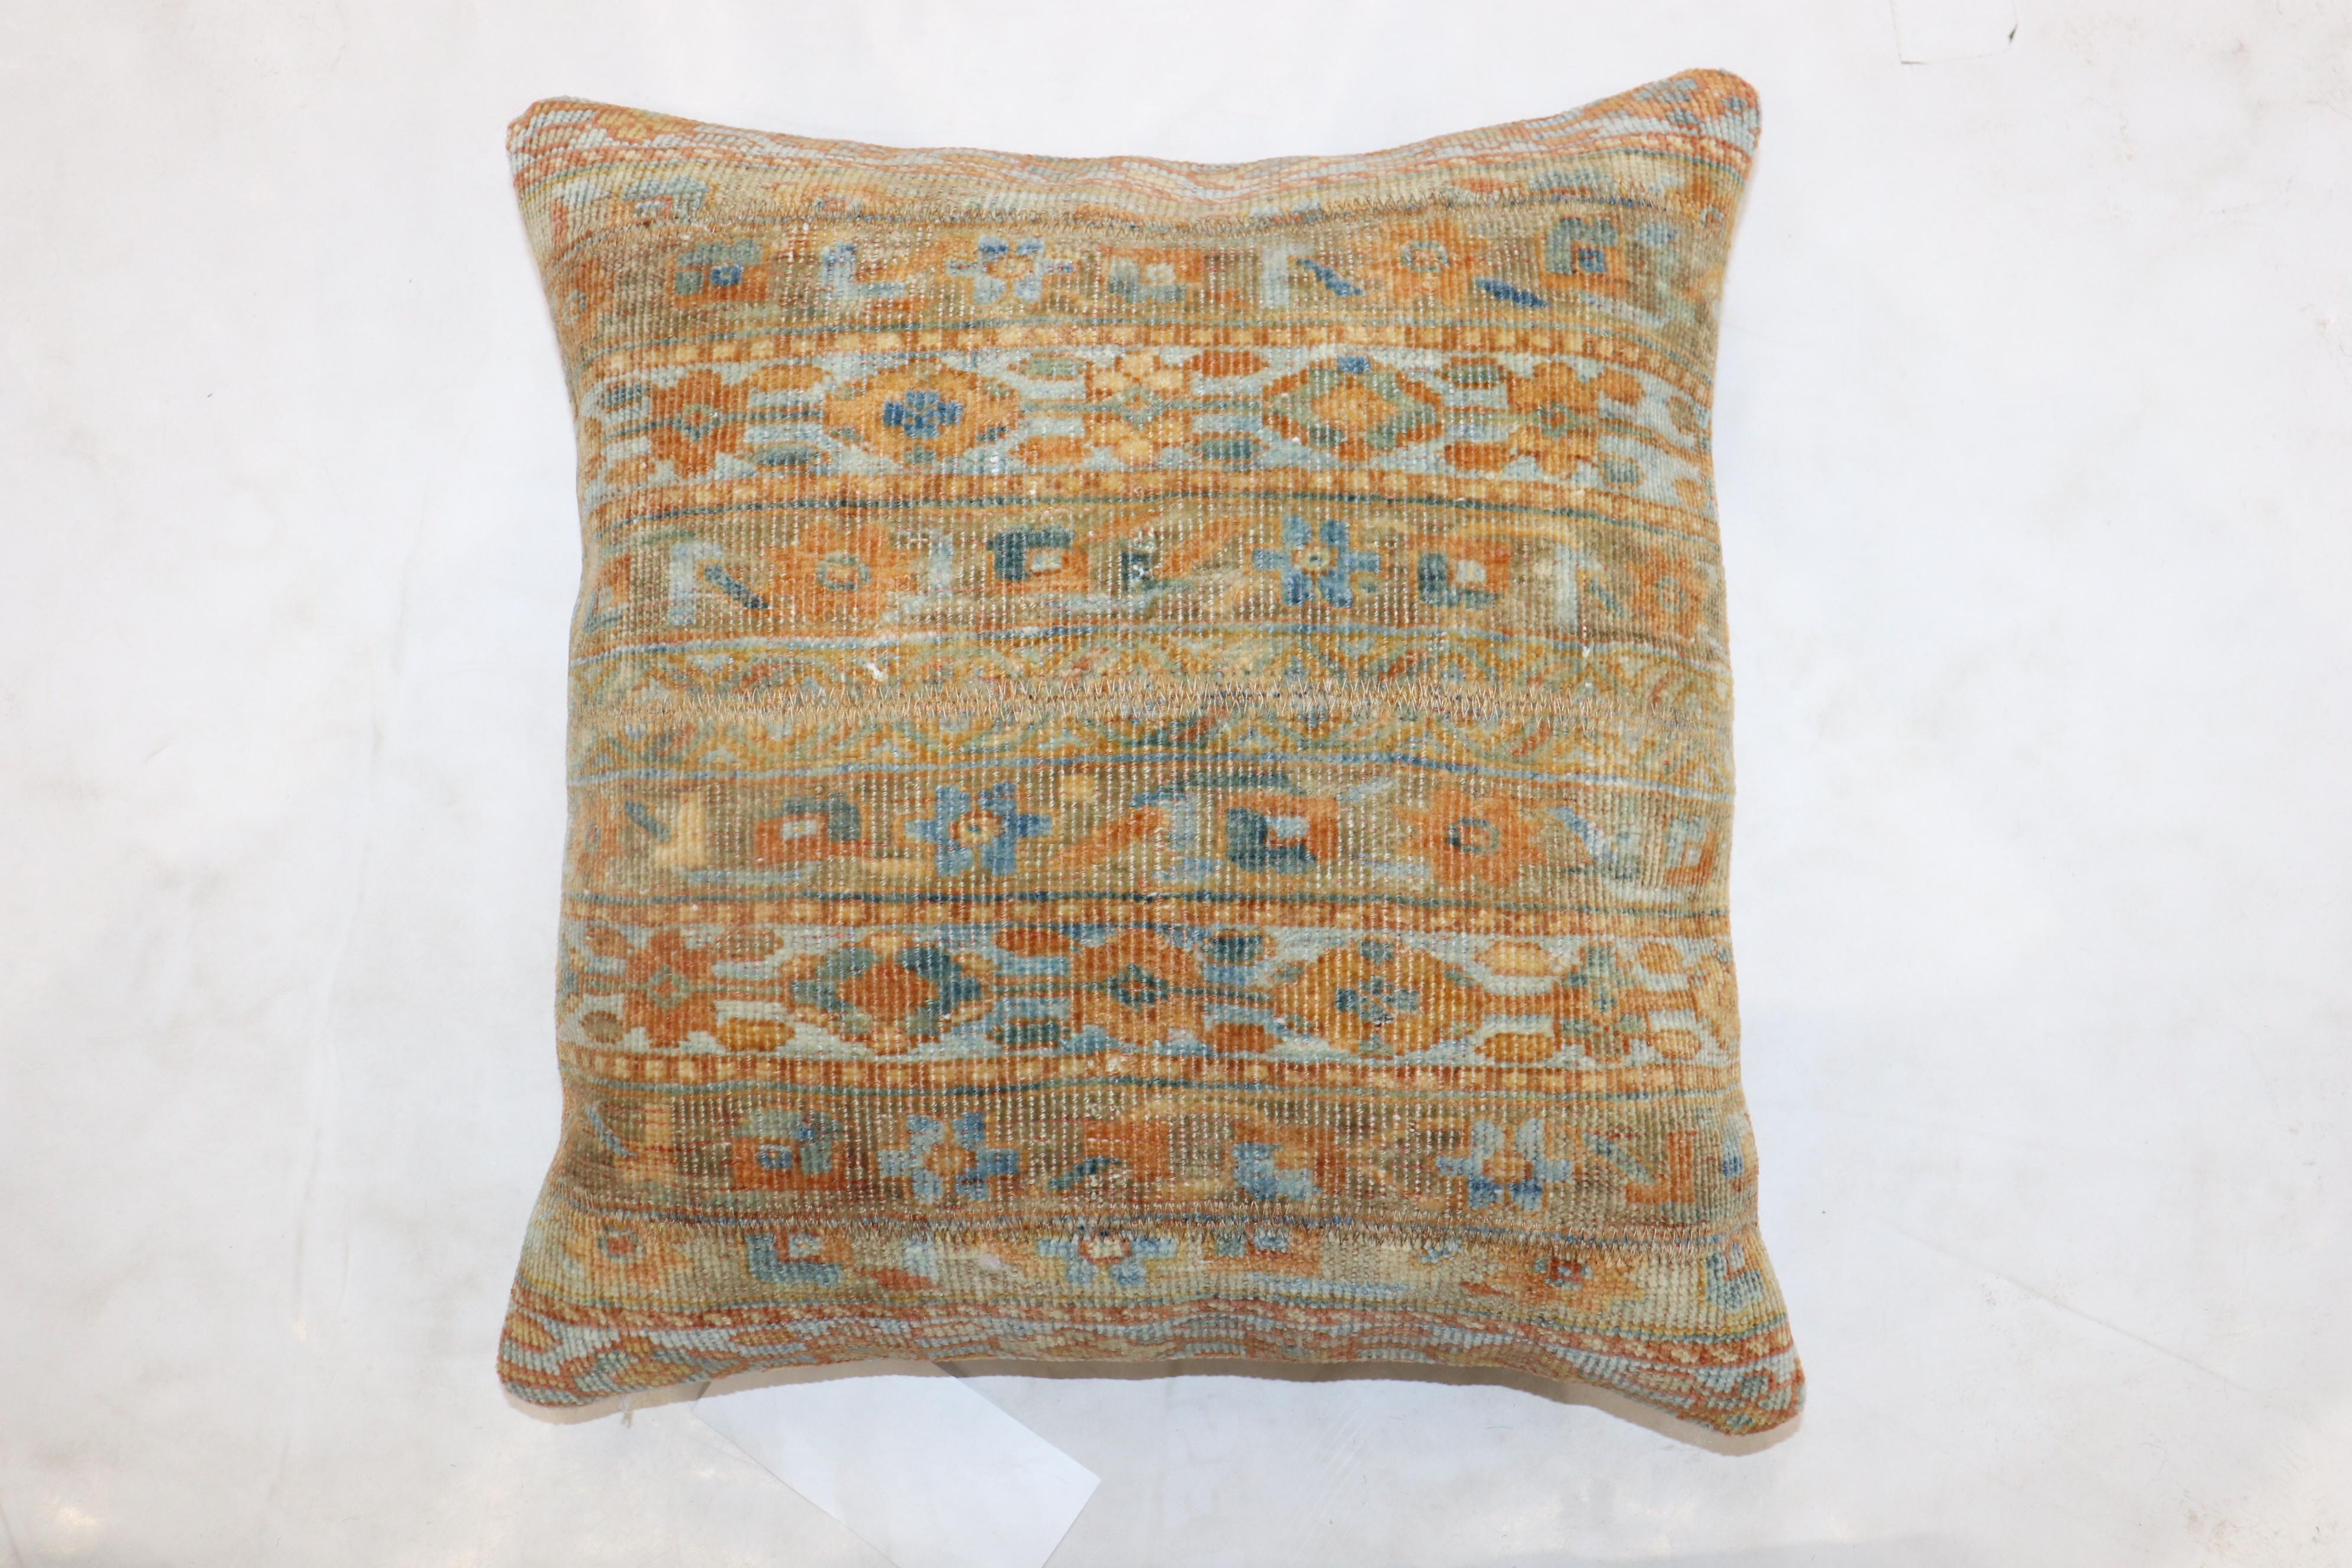 Pillow made from a Persian Malayer rug with light blue and orange accents.

Measures: 17